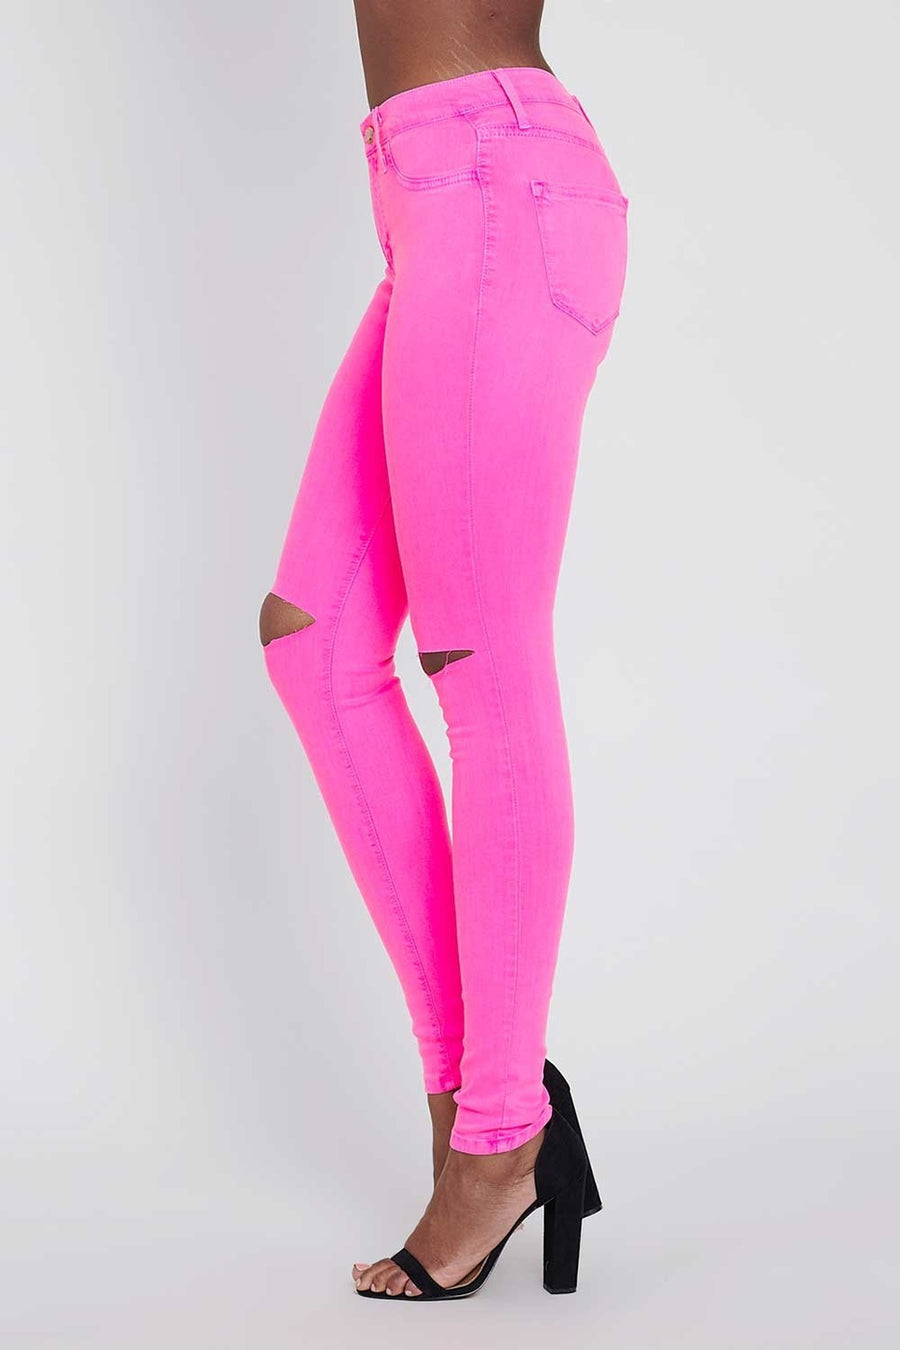 Hot Pink Barbie Jeans